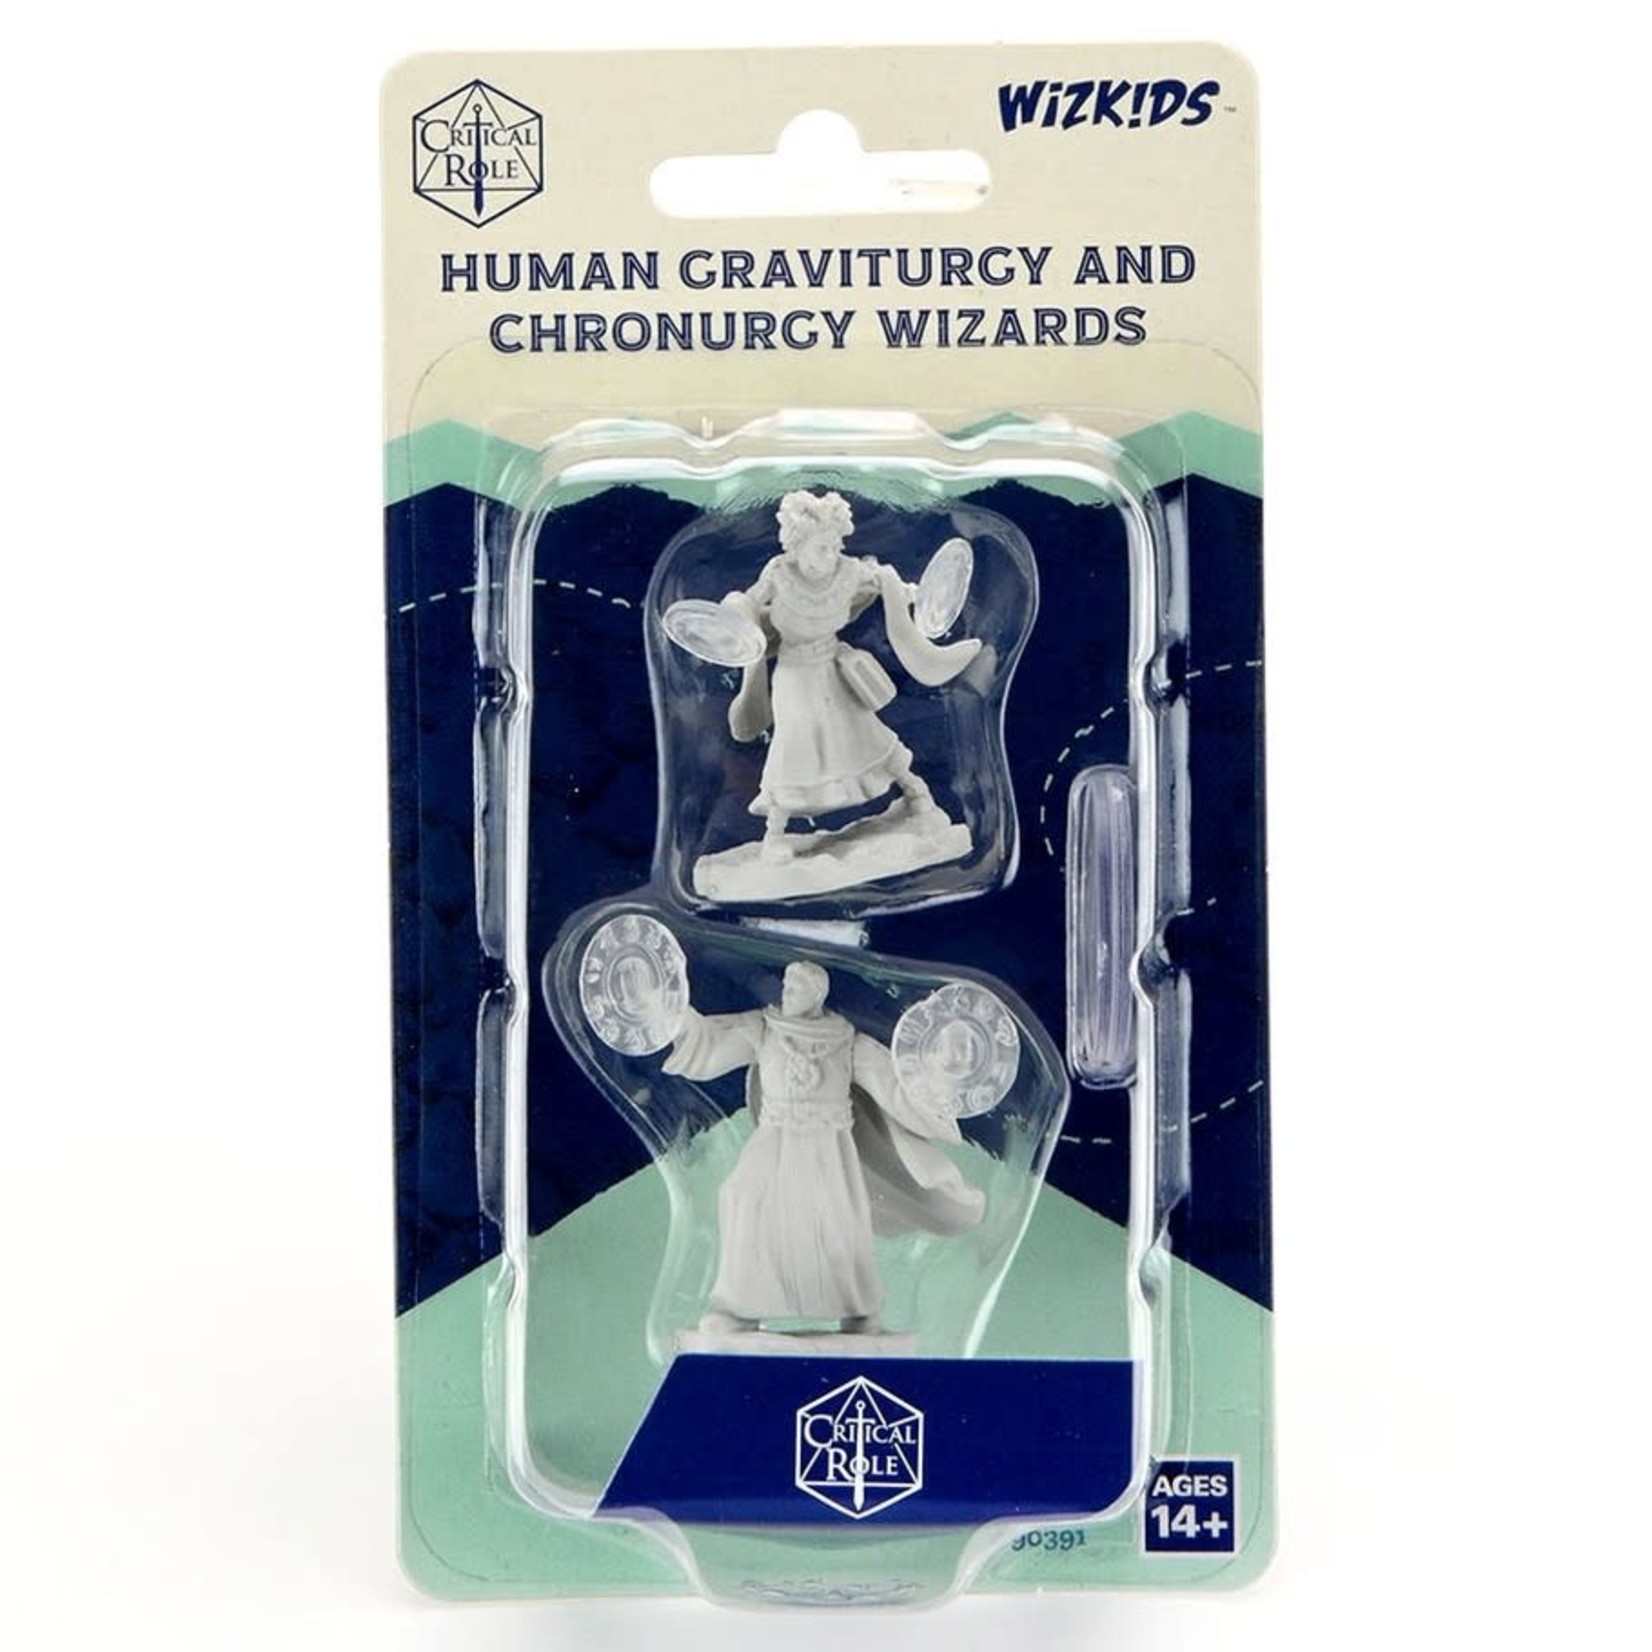 Wiz Kids Unpainted Miniatures: Human Graviturgy and Chronurgy Wizards - CR - W01